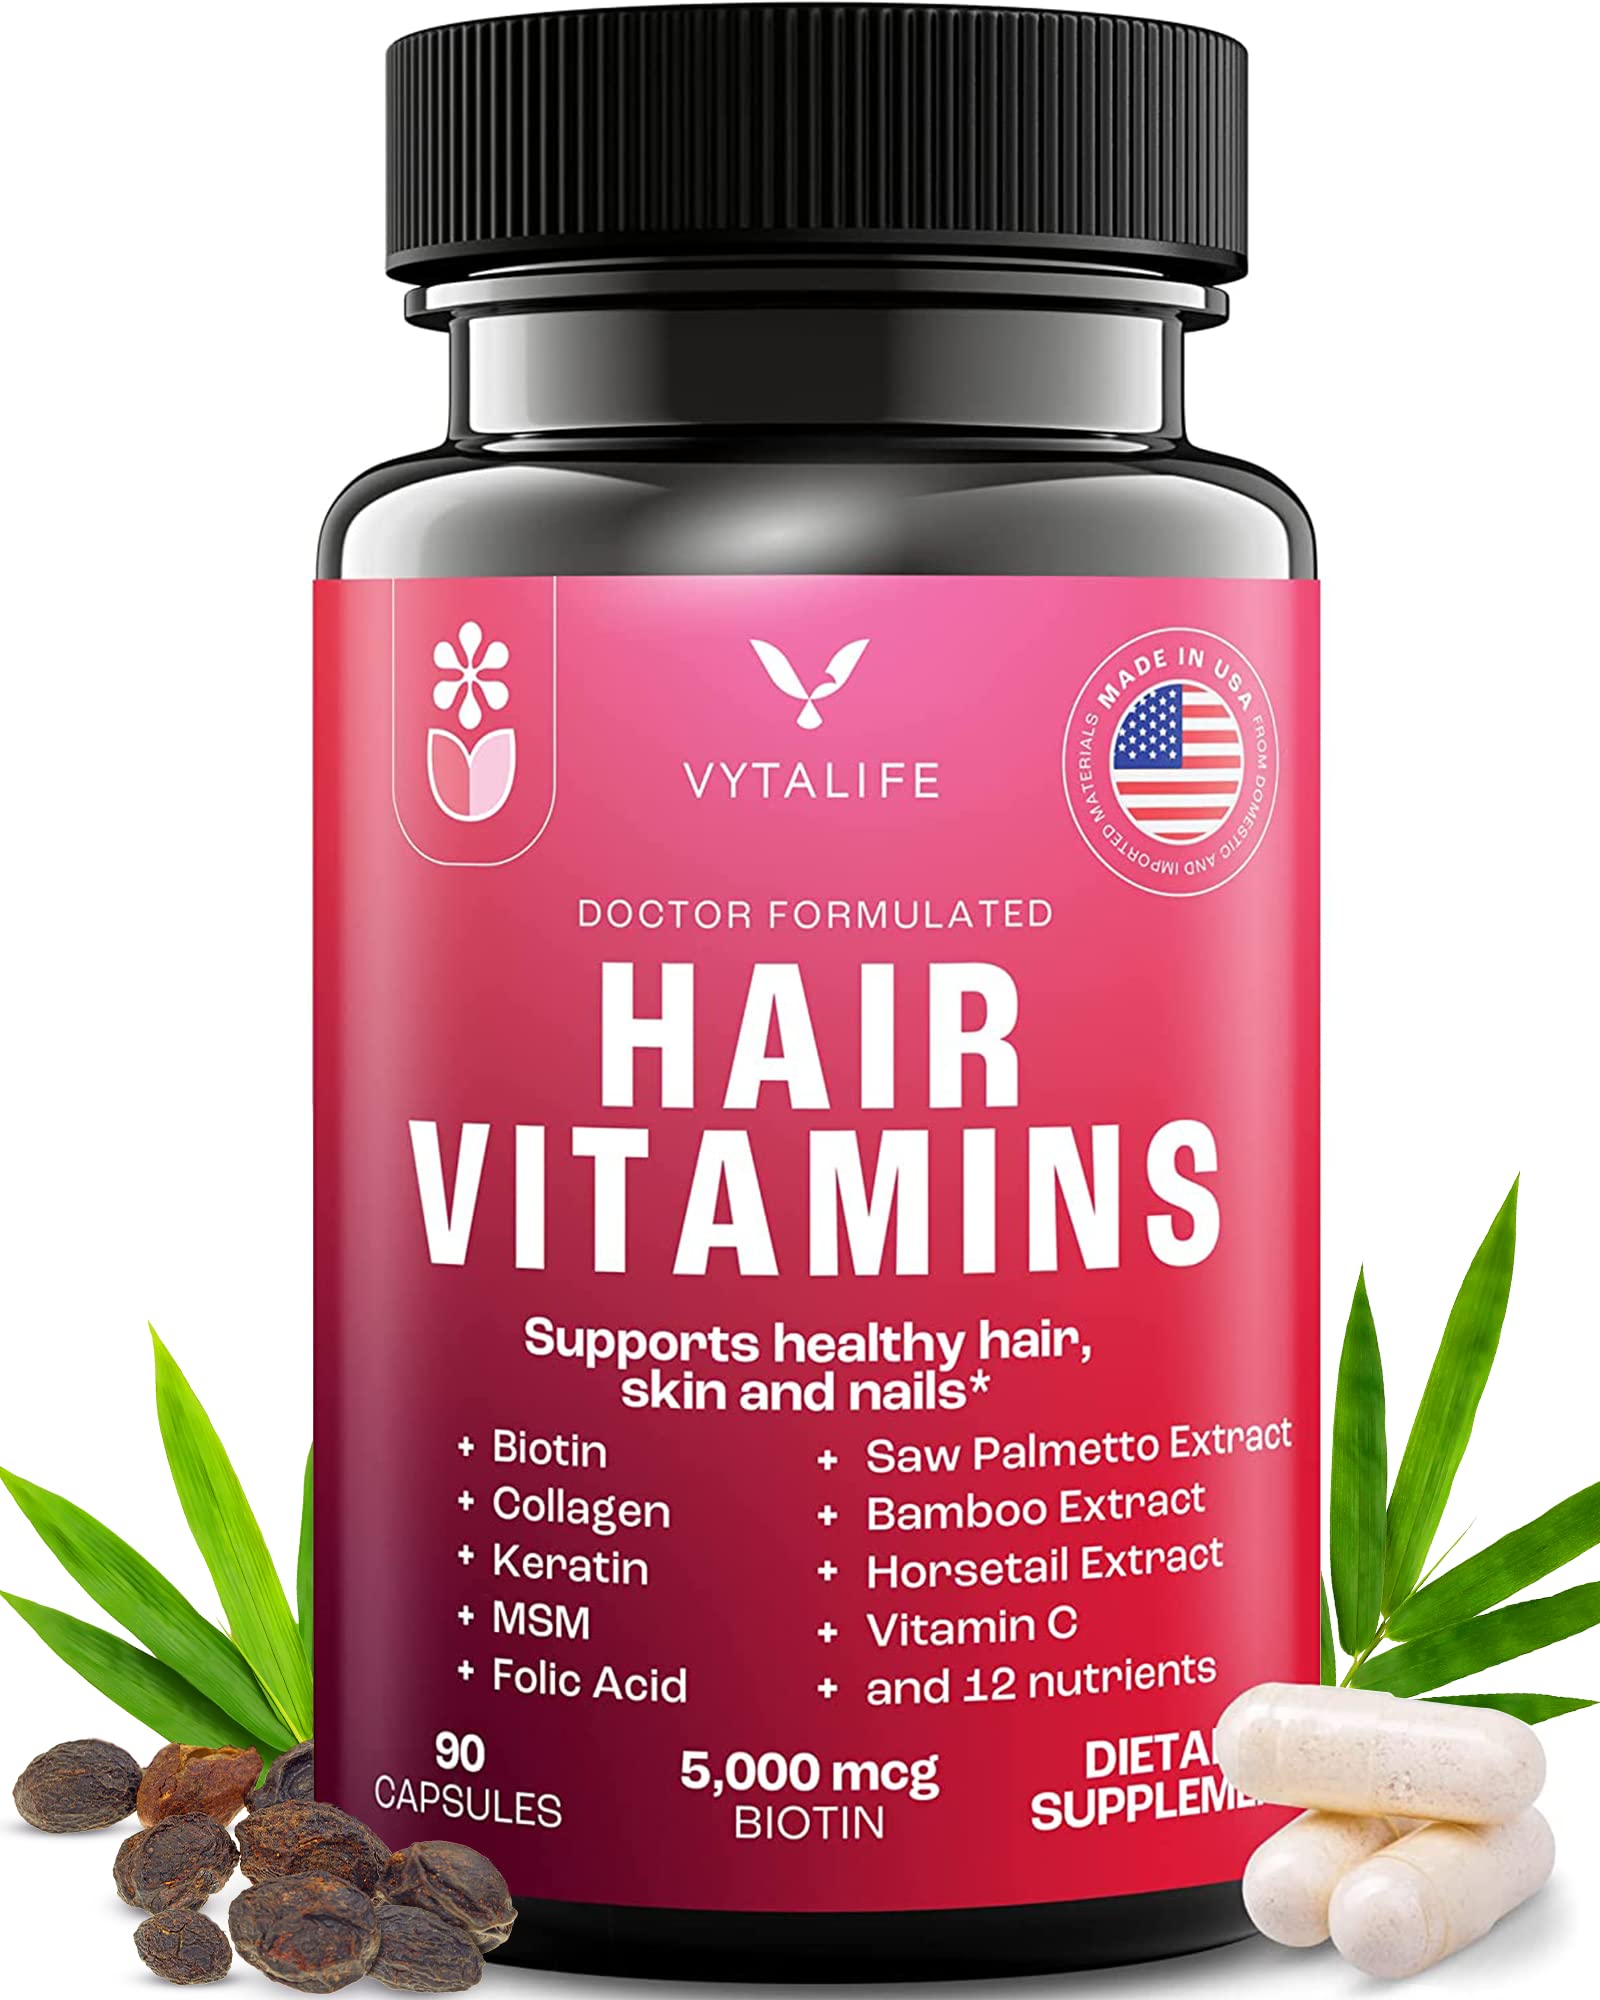 EVOLUTION_18 Beauty Hair and Nail Growth Capsules with Collagen, Biotin,  and Keratin, 20 Servings - Walmart.com